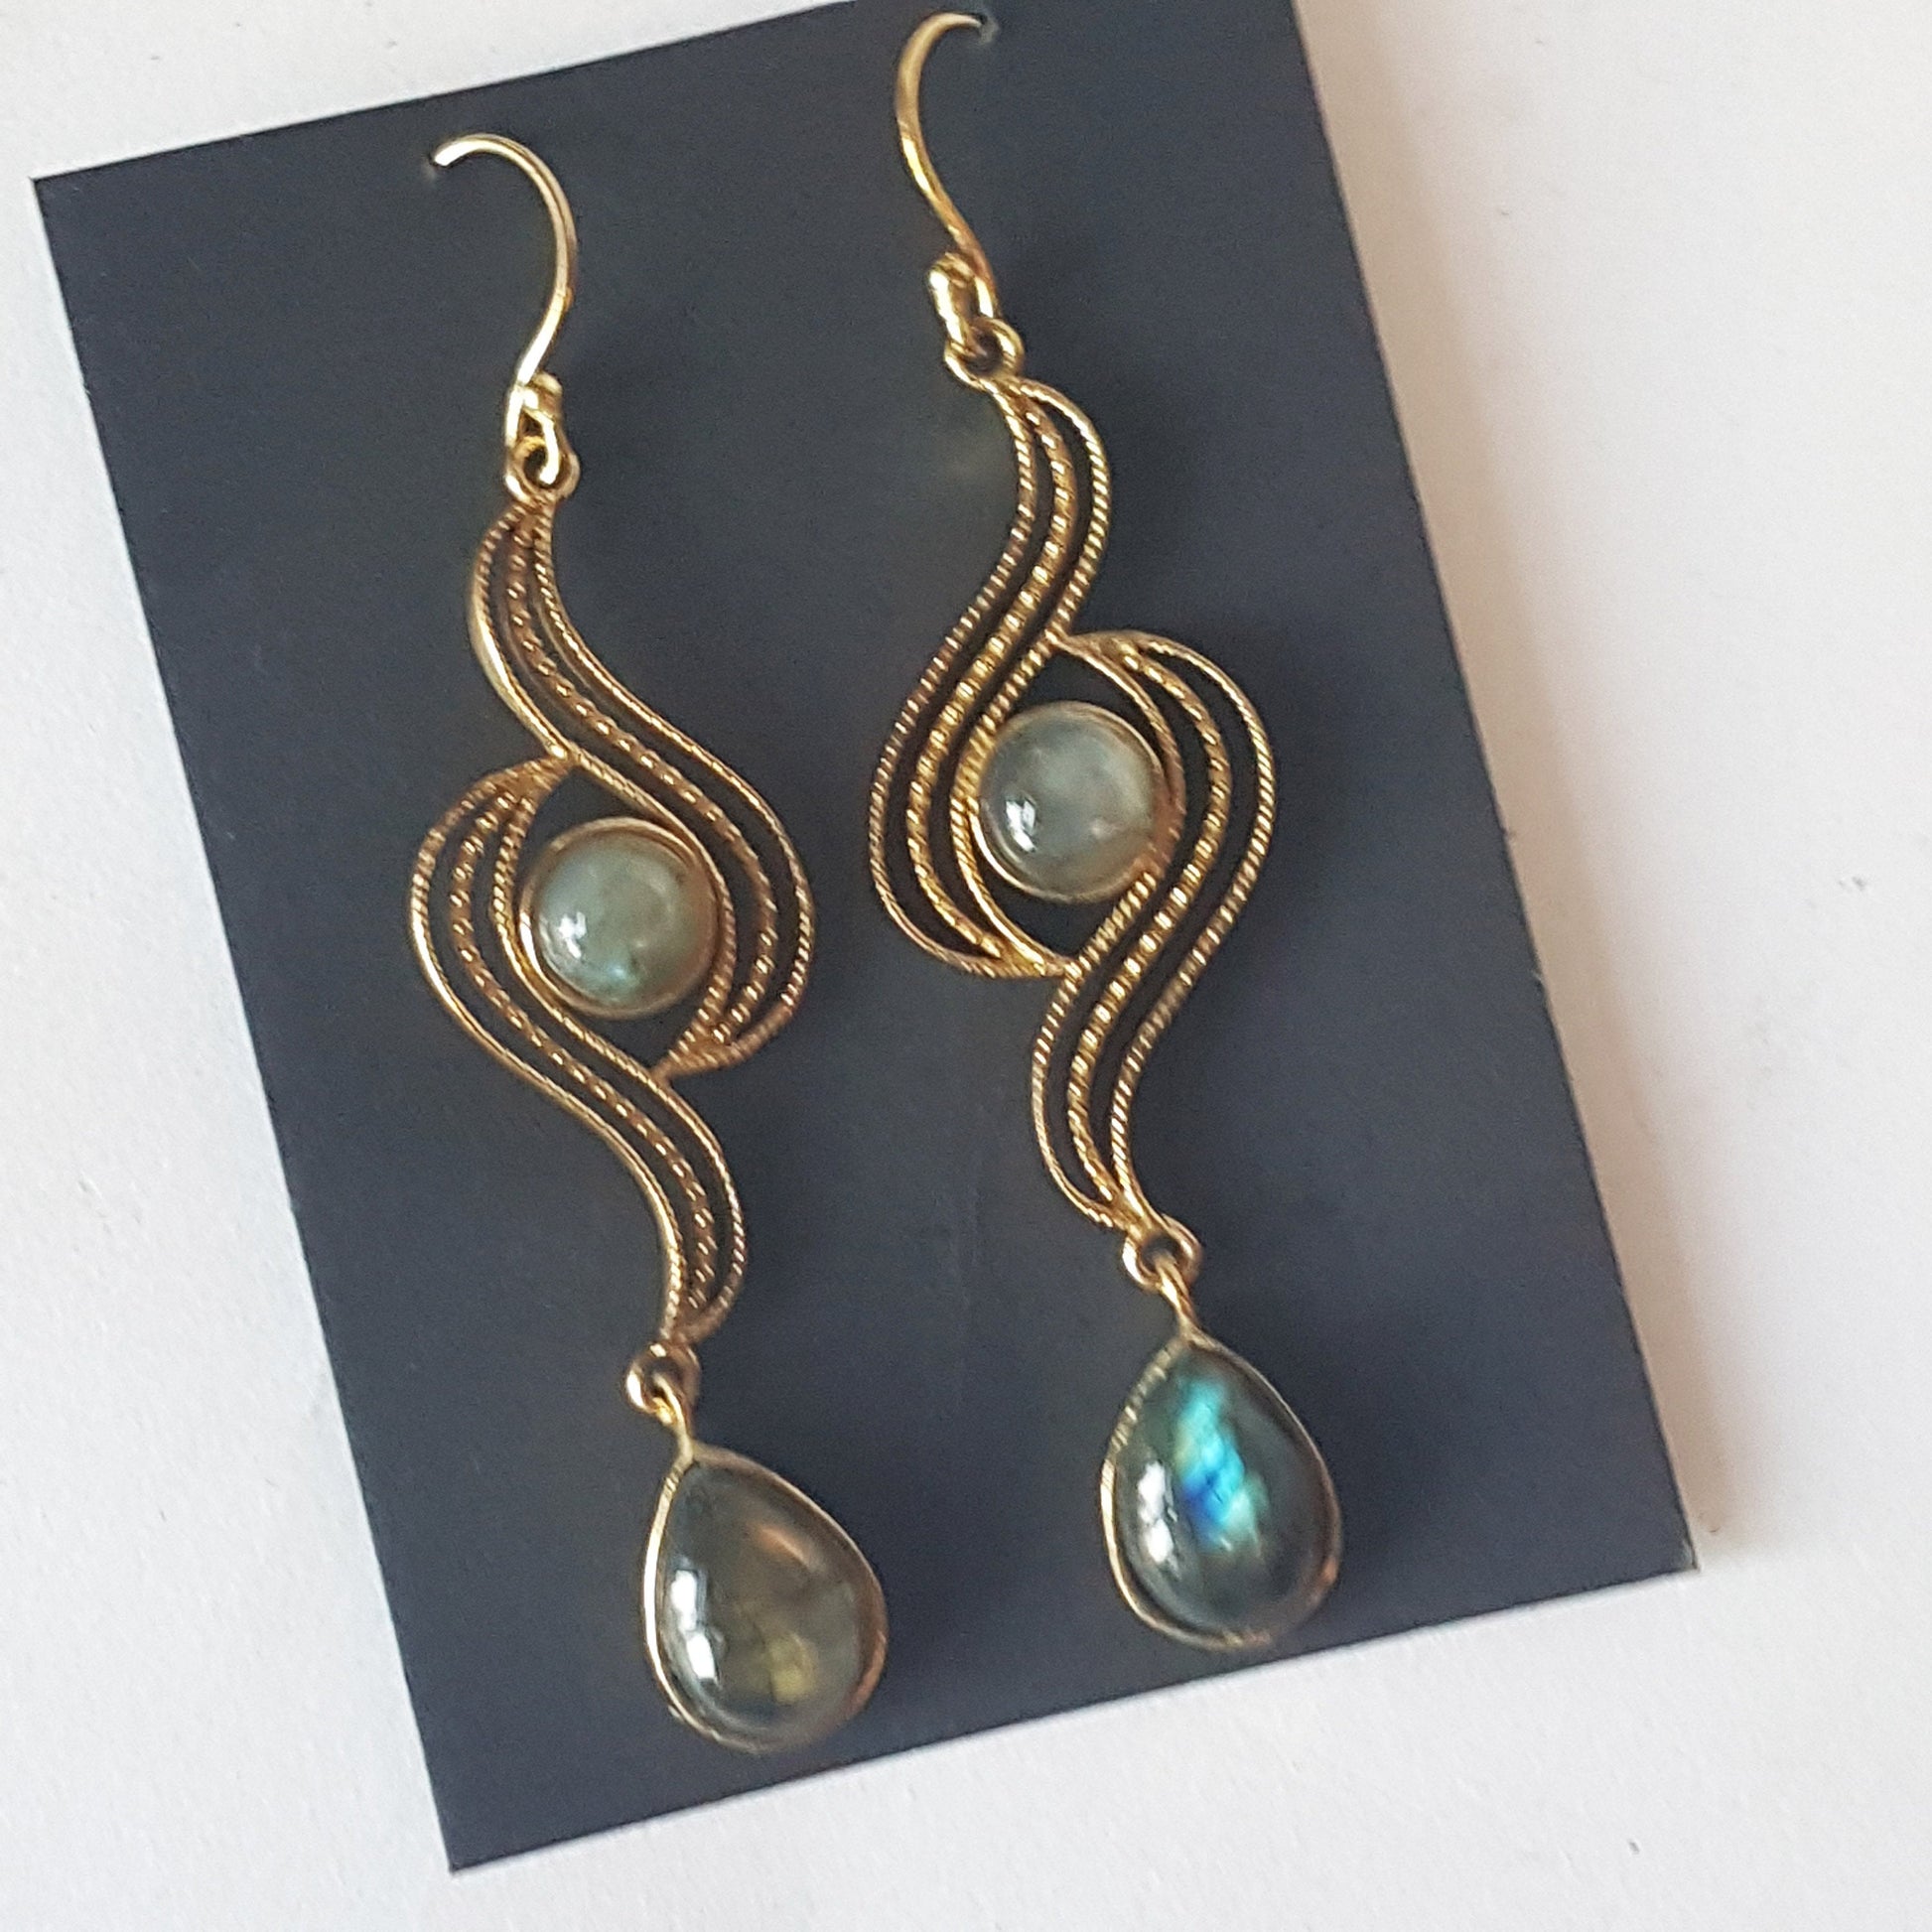 Dramatic double labradorite stone earrings. 3 inch length in bronze metal swirl design. Dressy gala boho style. Free shipping. In stock now. - Vintage India Ca